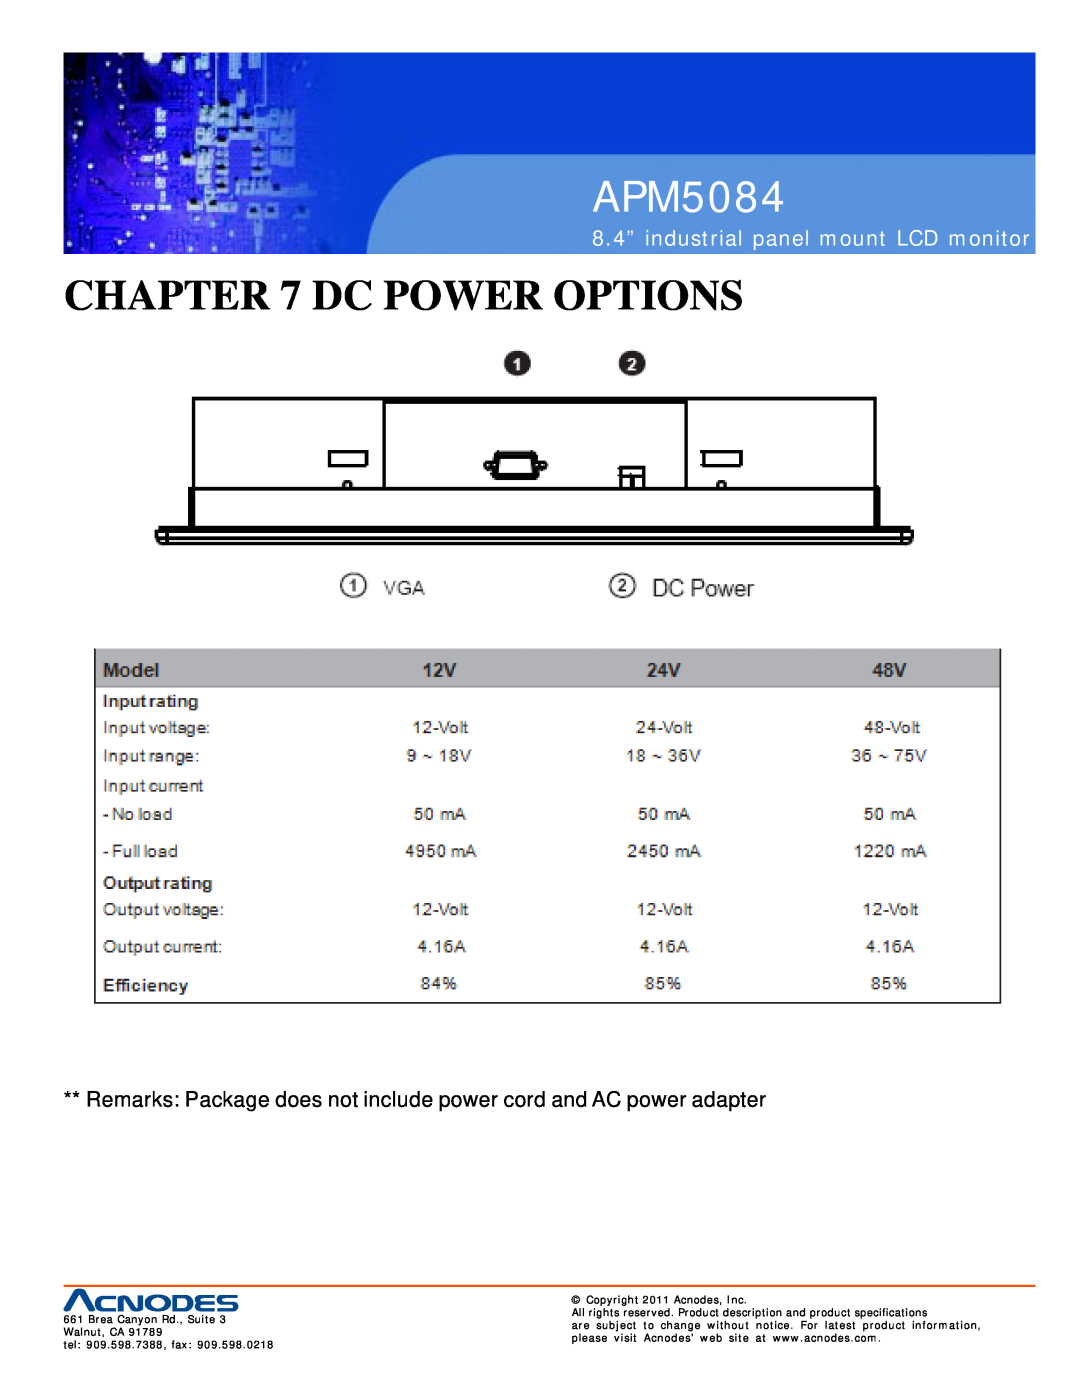 Acnodes APM5084 user manual Dc Power Options, 8.4” industrial panel mount LCD monitor, Copyright 2011 Acnodes, Inc 